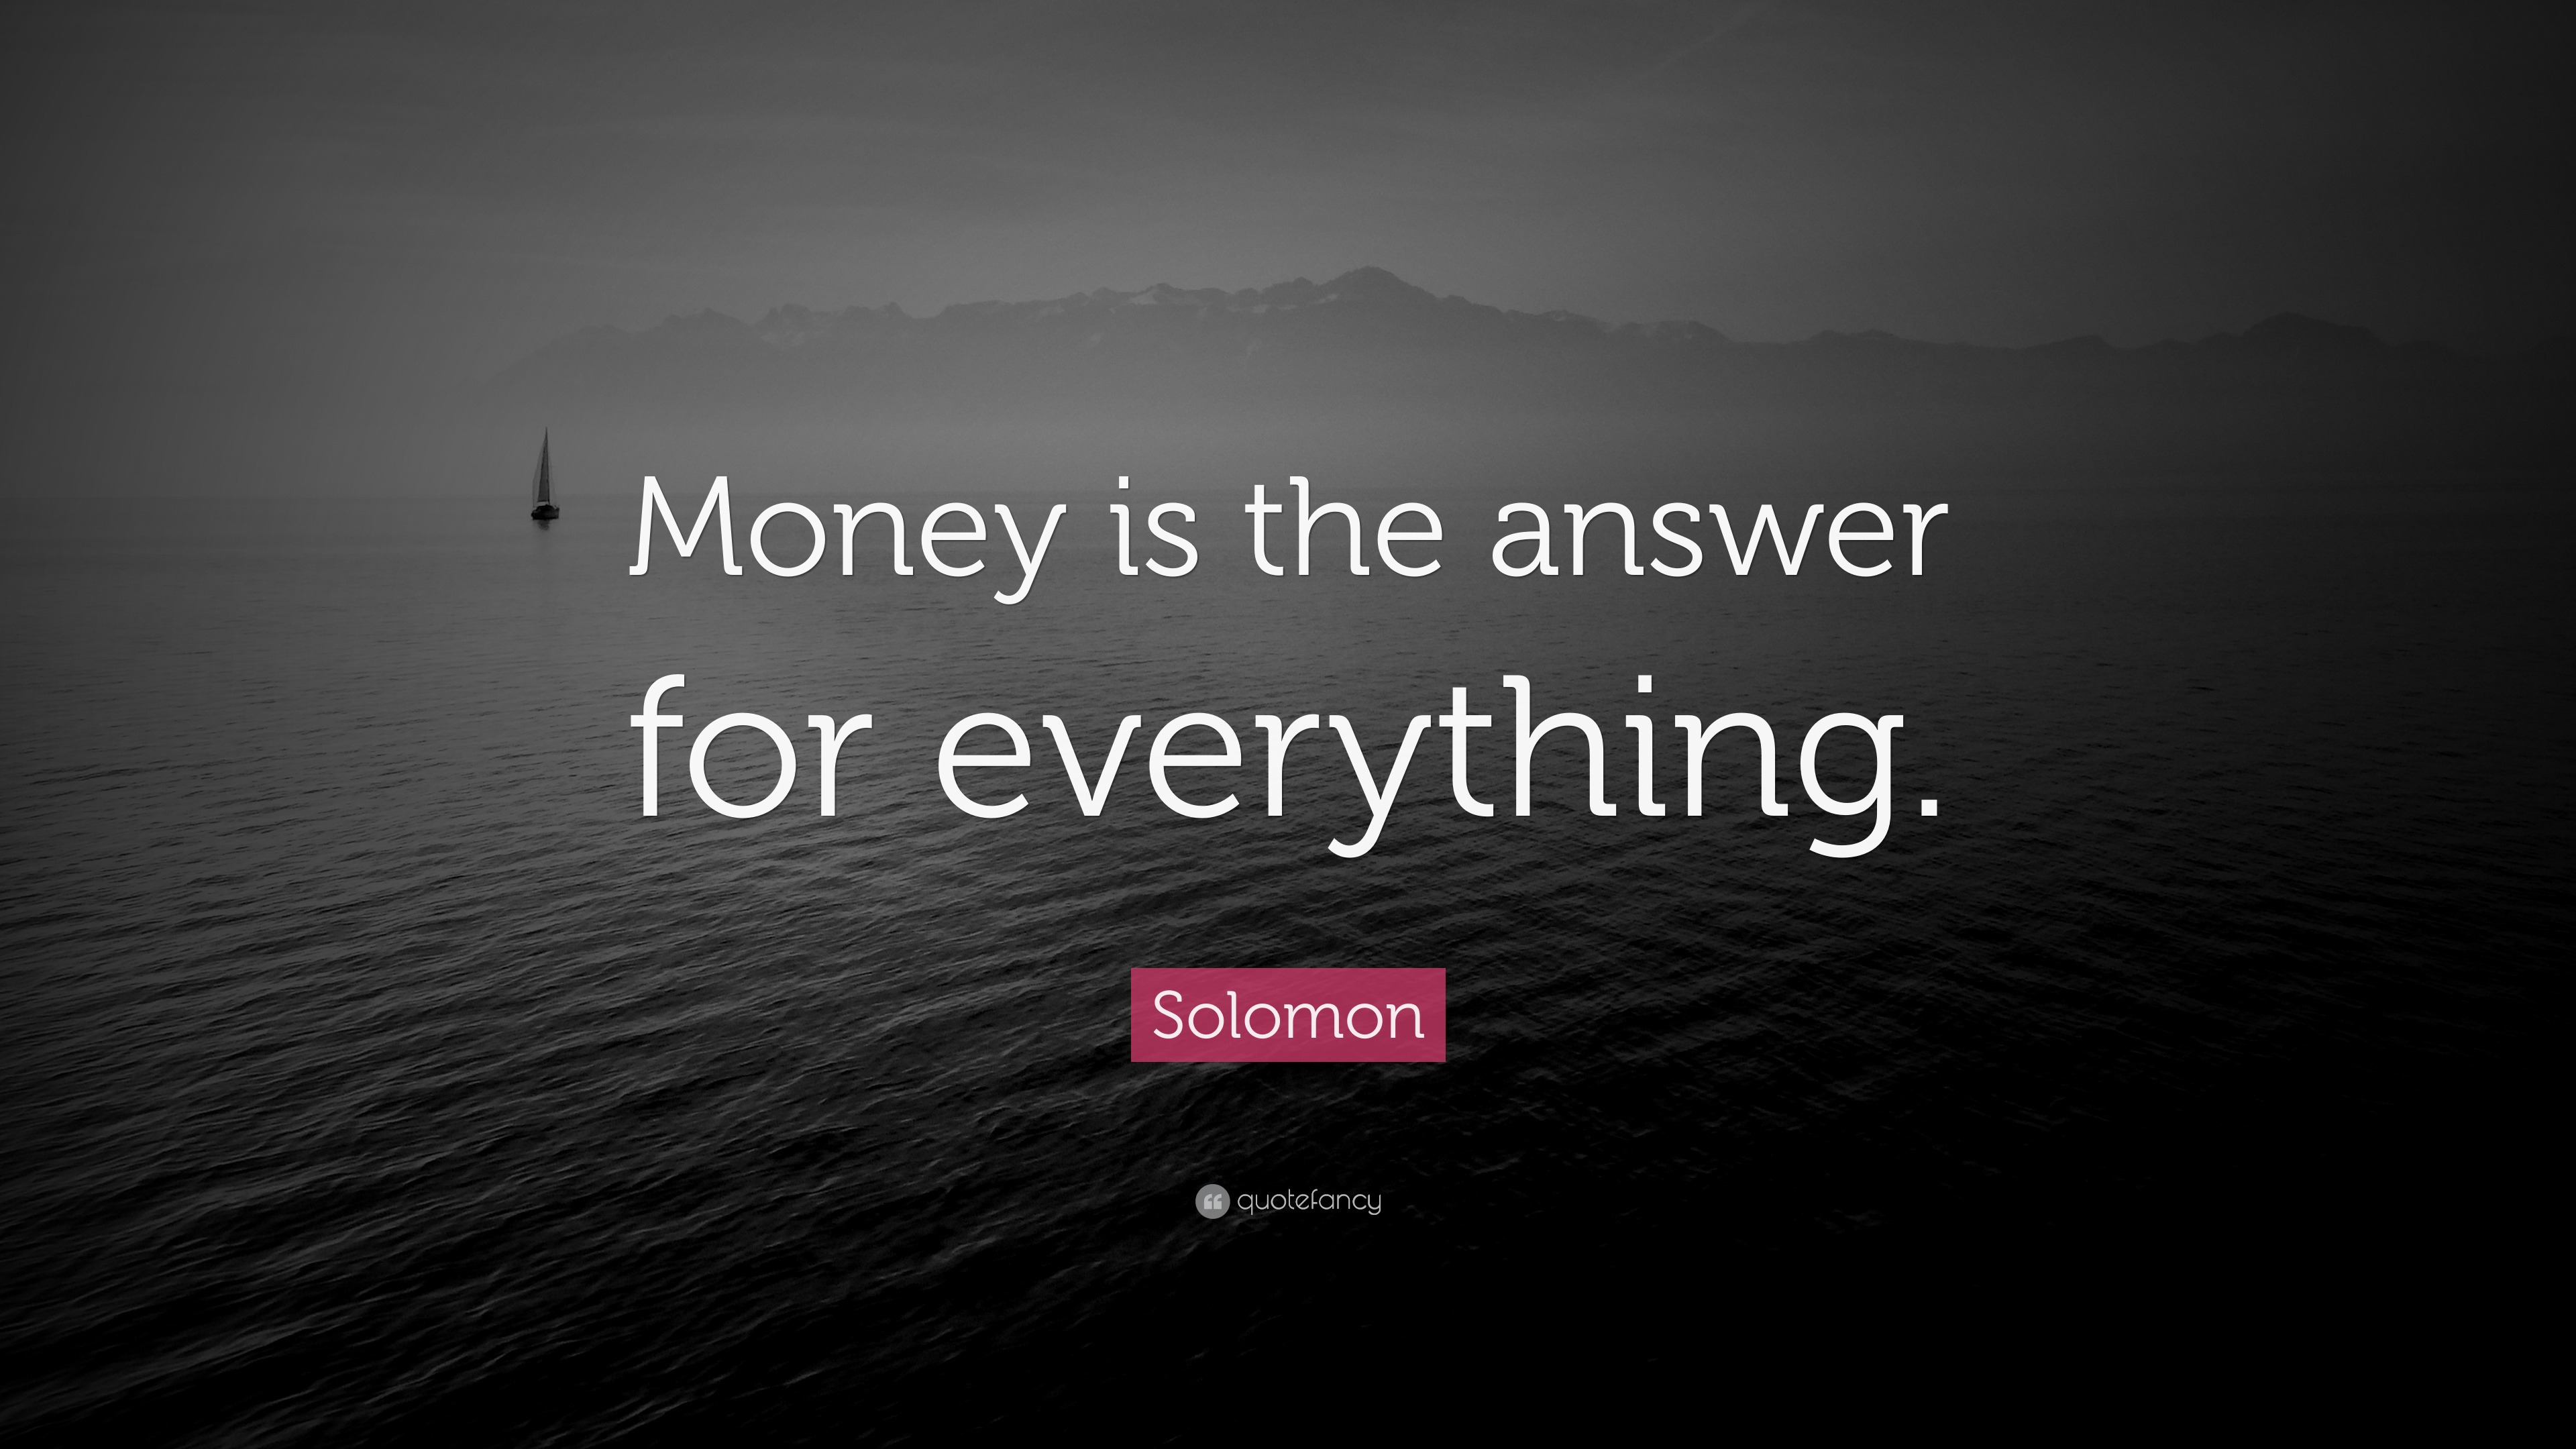 King Solomon Quotes On Money - King Solomon quote 4 Canvas Print by